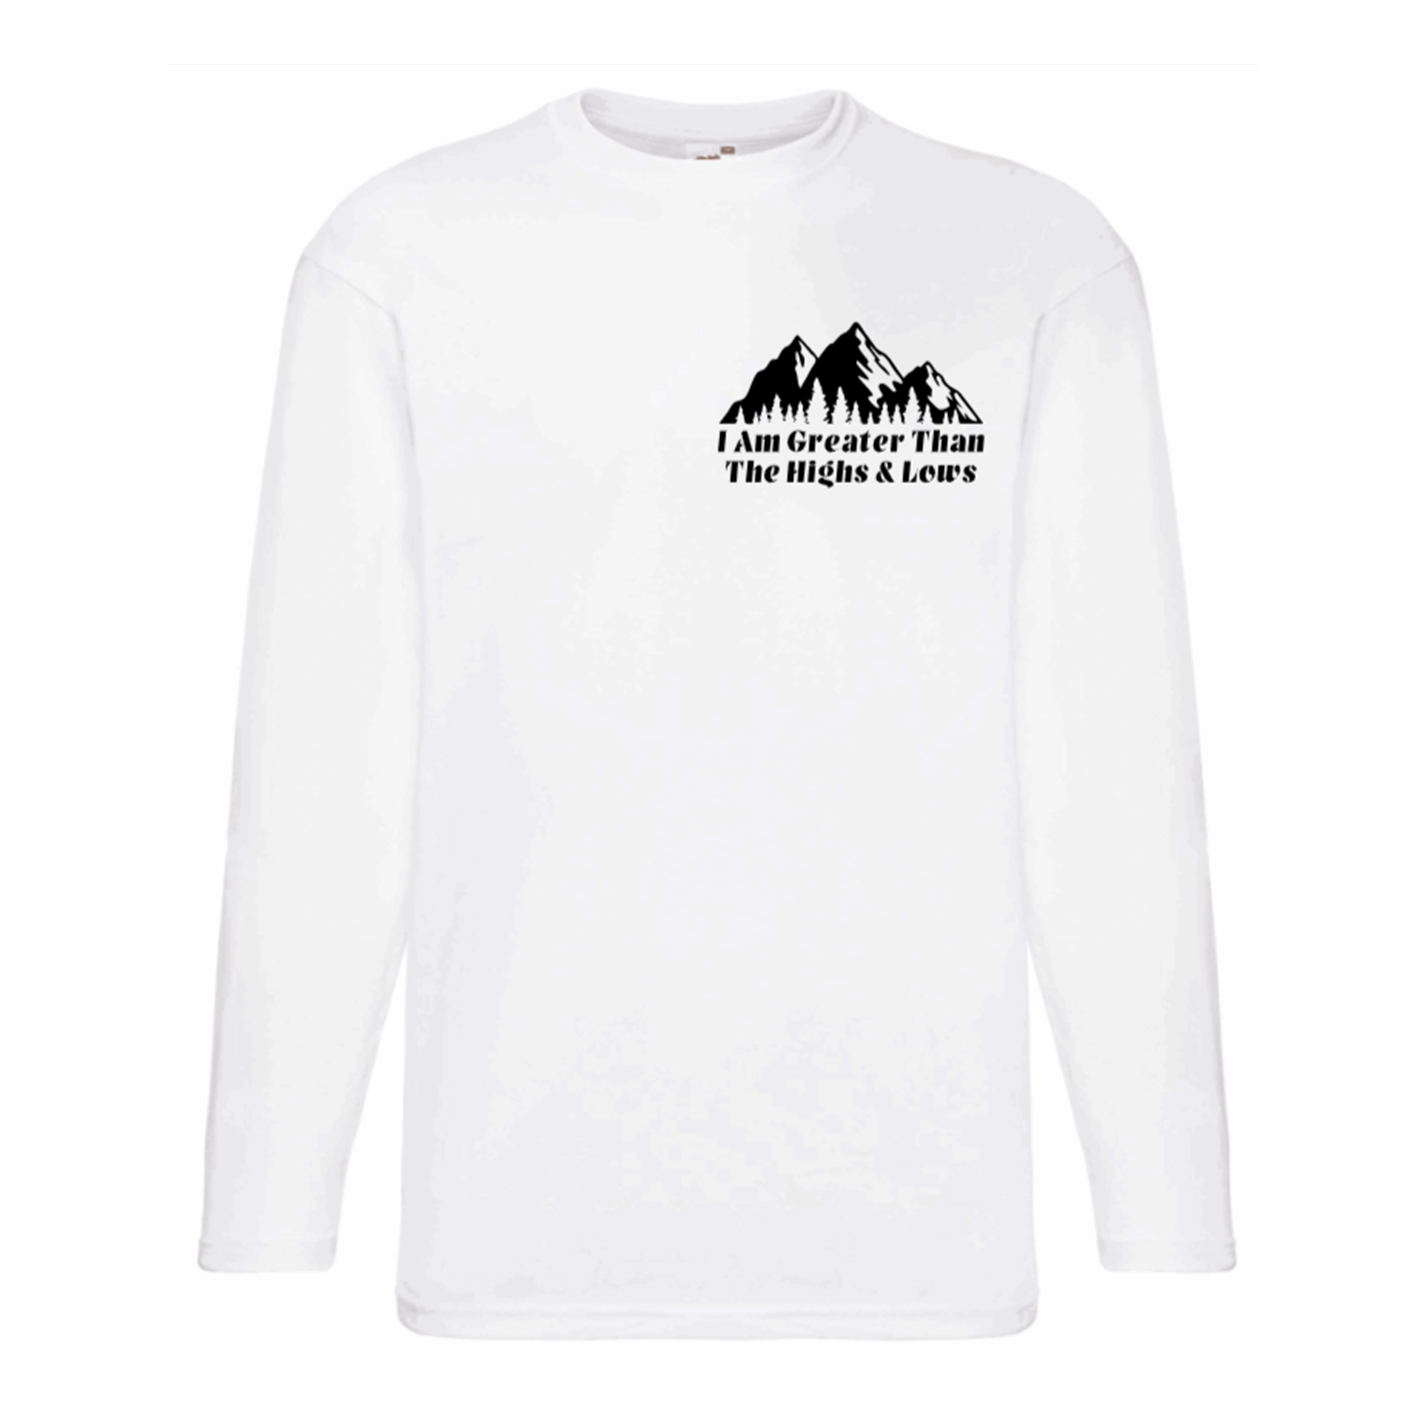 I Am Greater Than The Highs & Lows Long Sleeve T Shirt